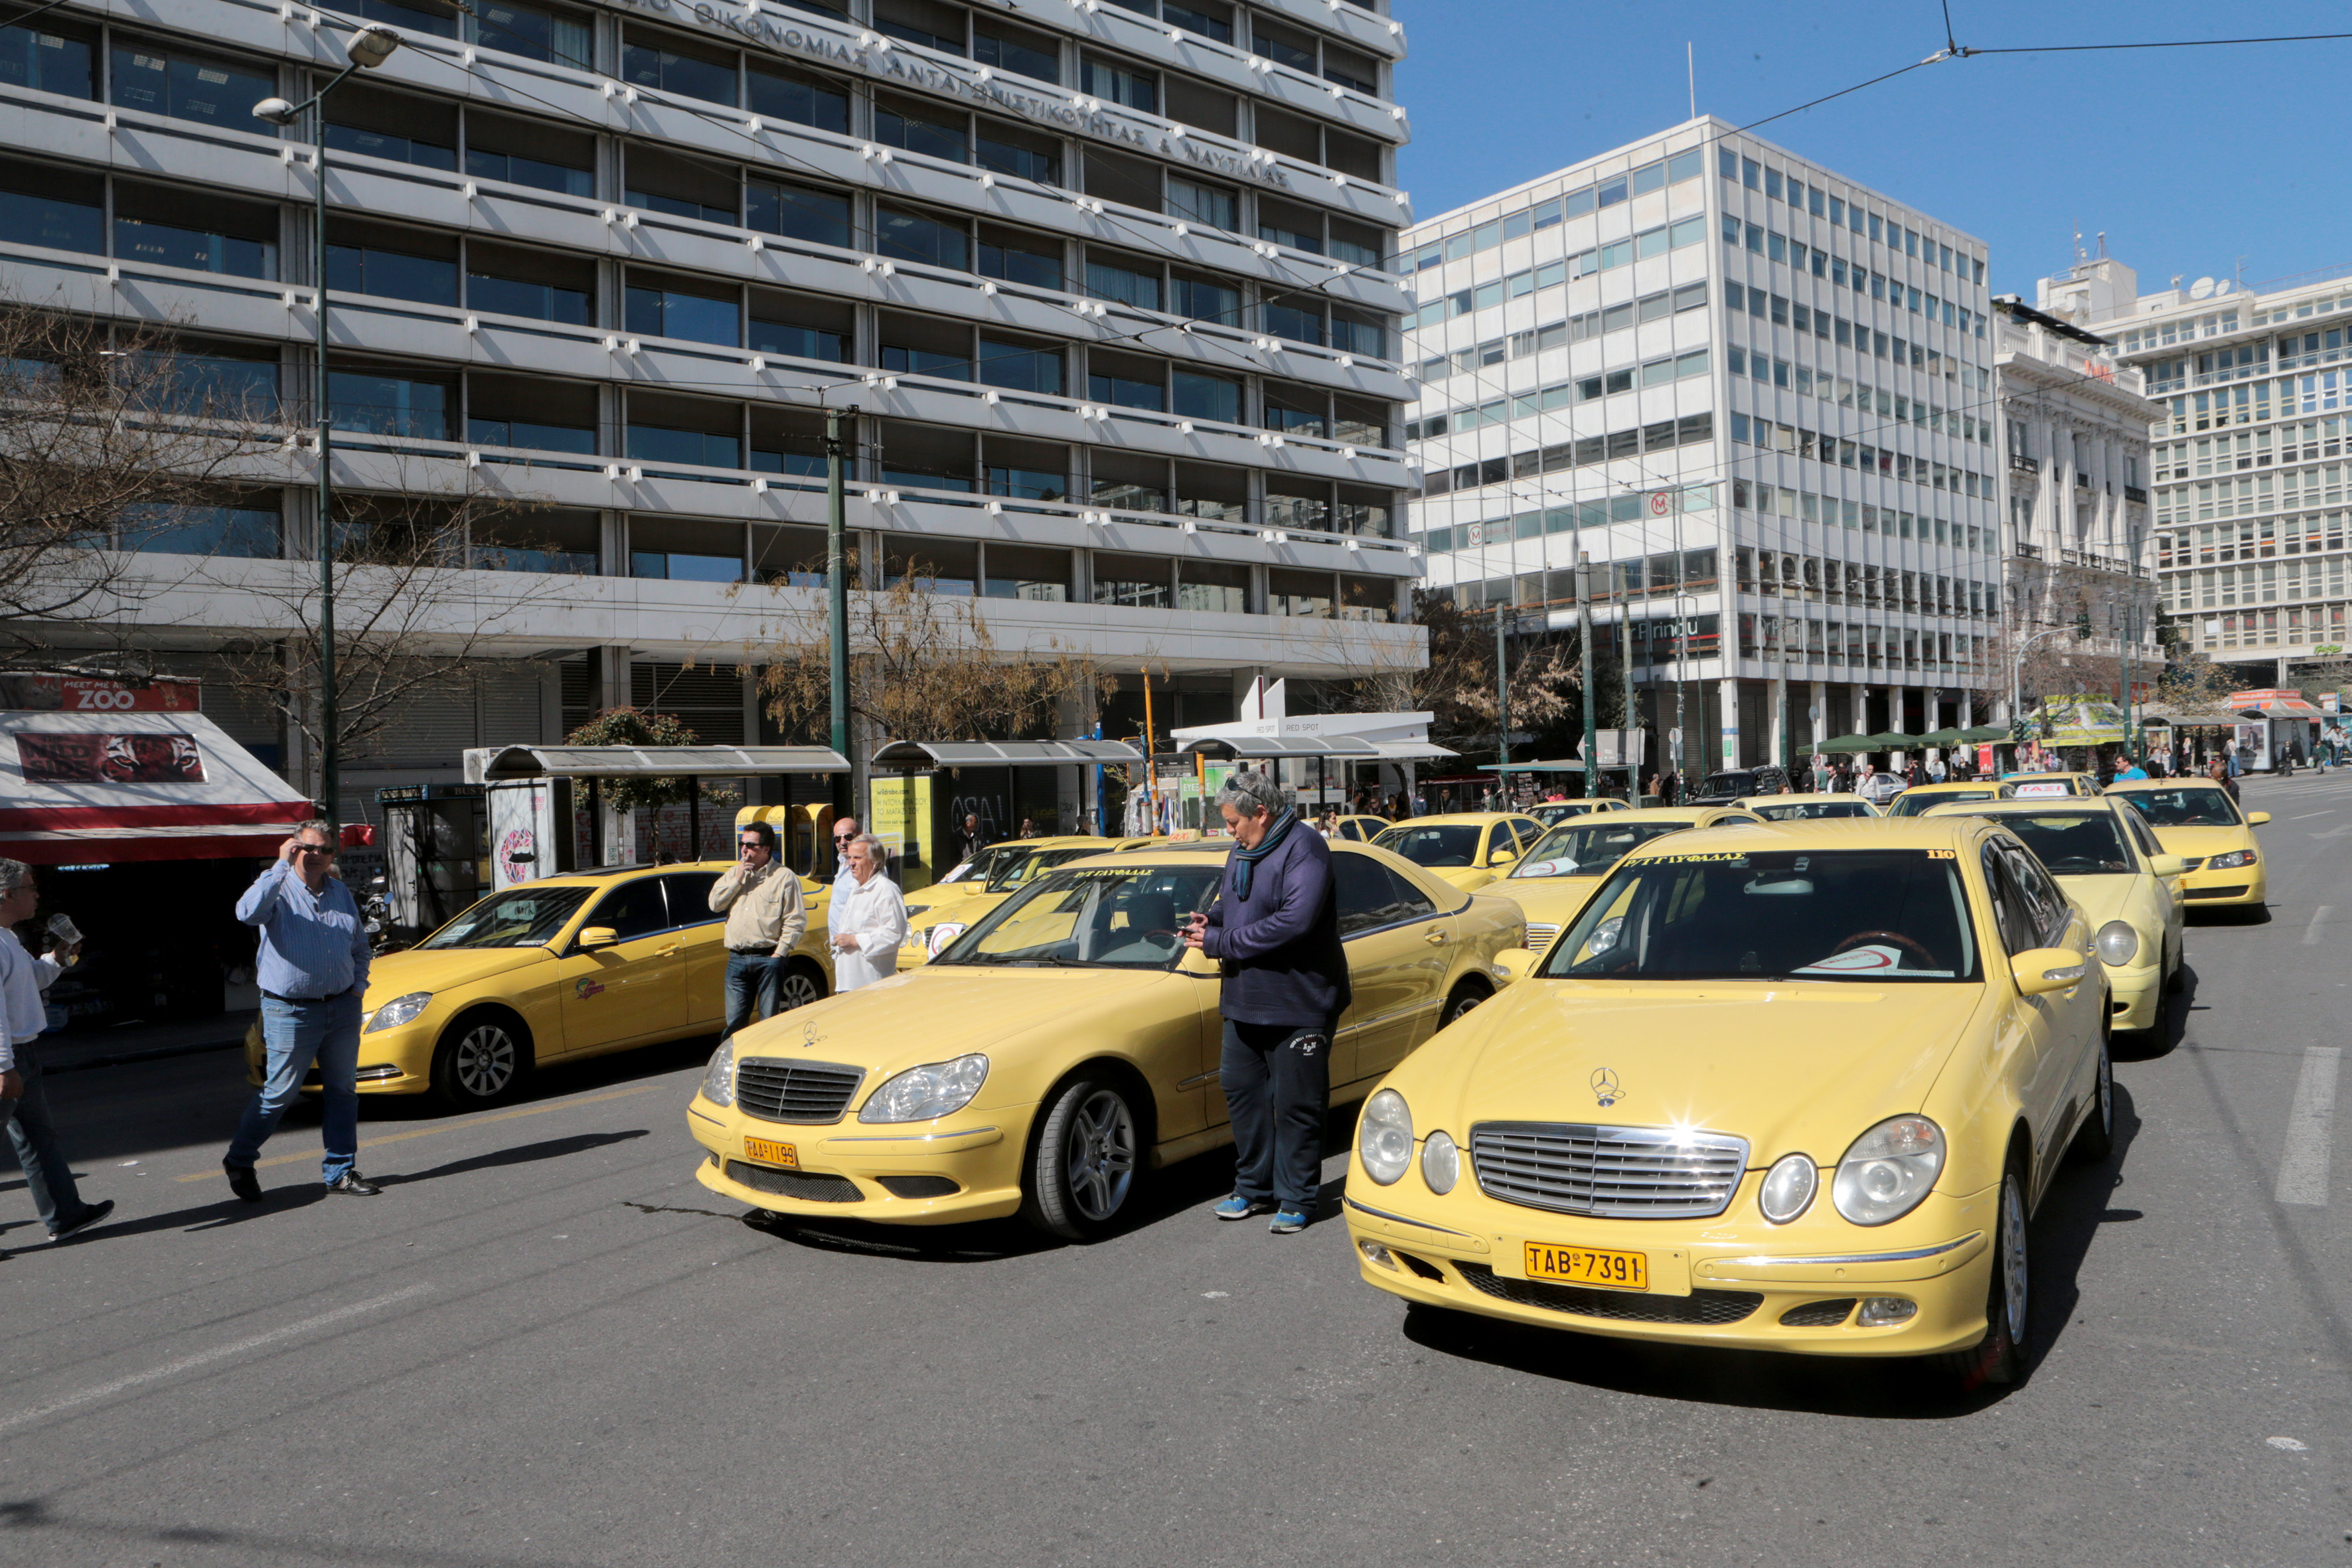 Government regulates private taxi firms, revises Highway Code